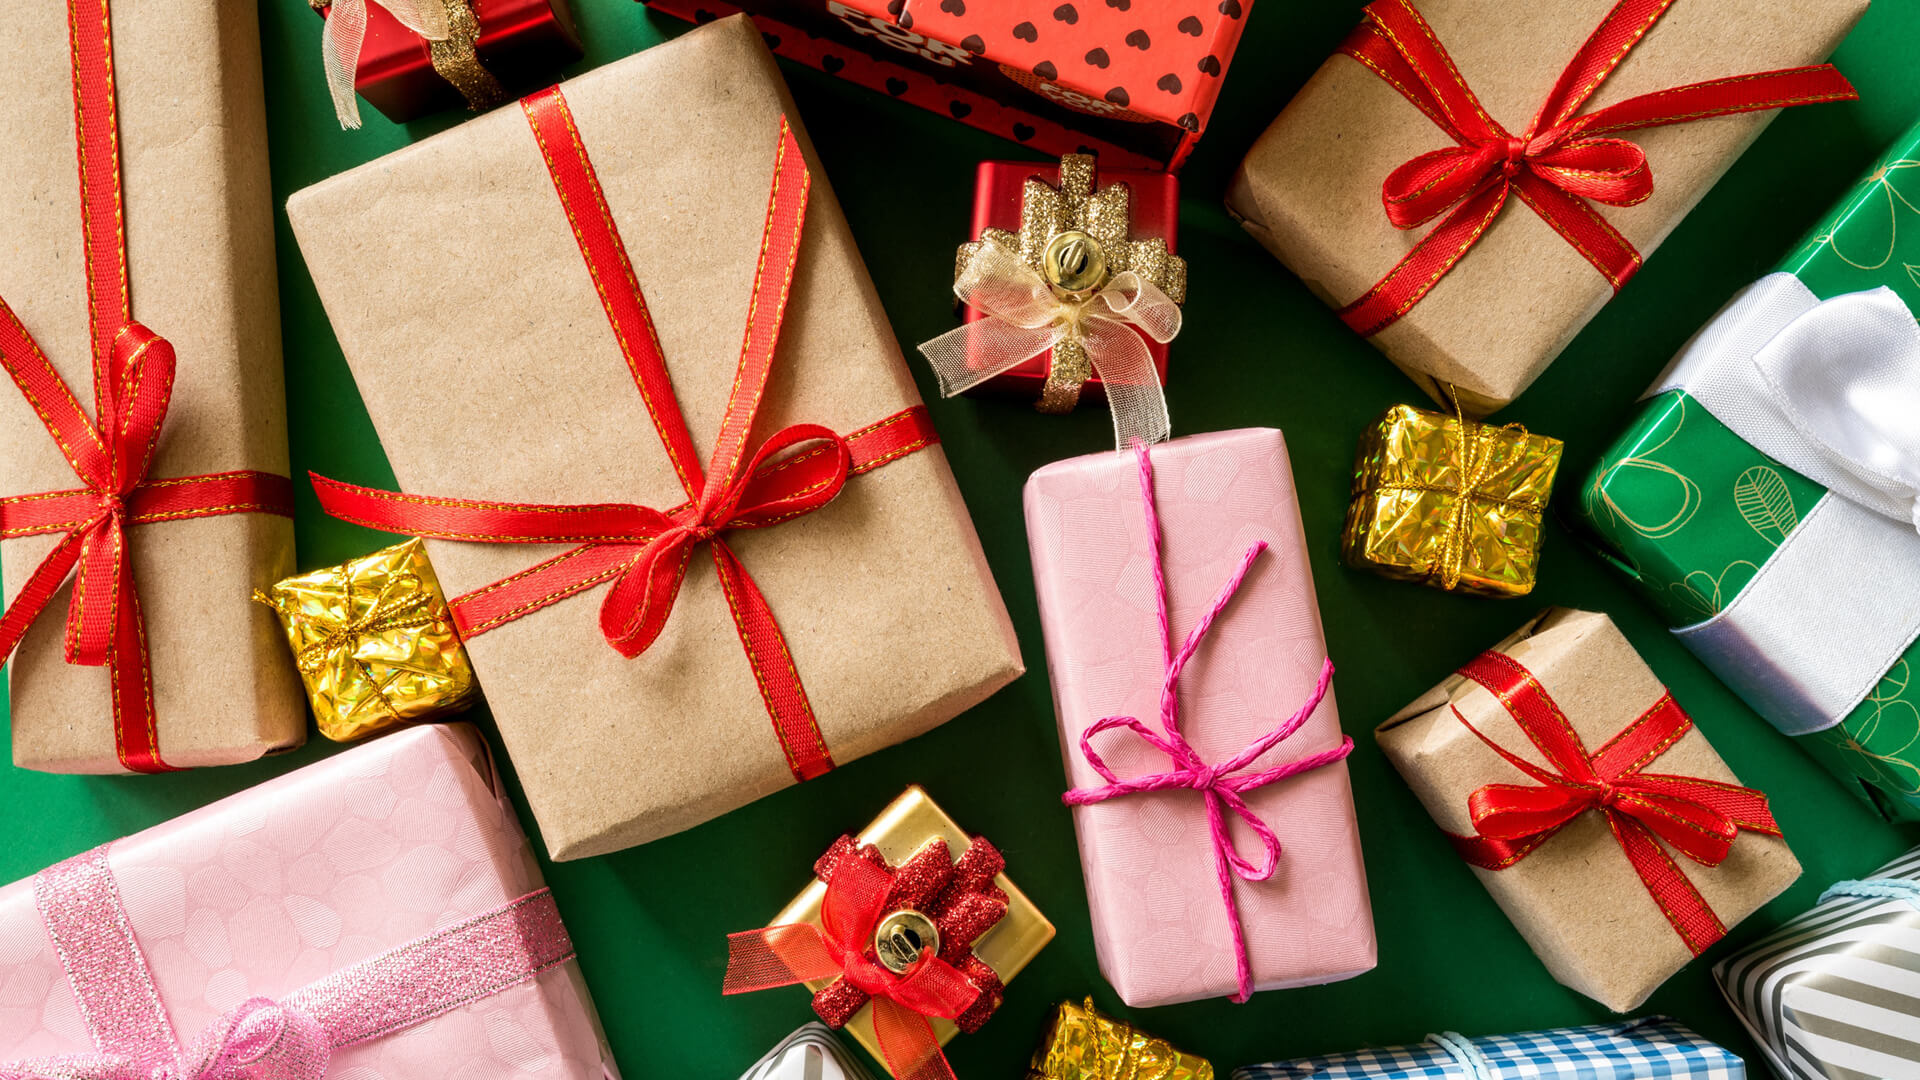 2.3 million pounds of wrapping paper enters landfills each year